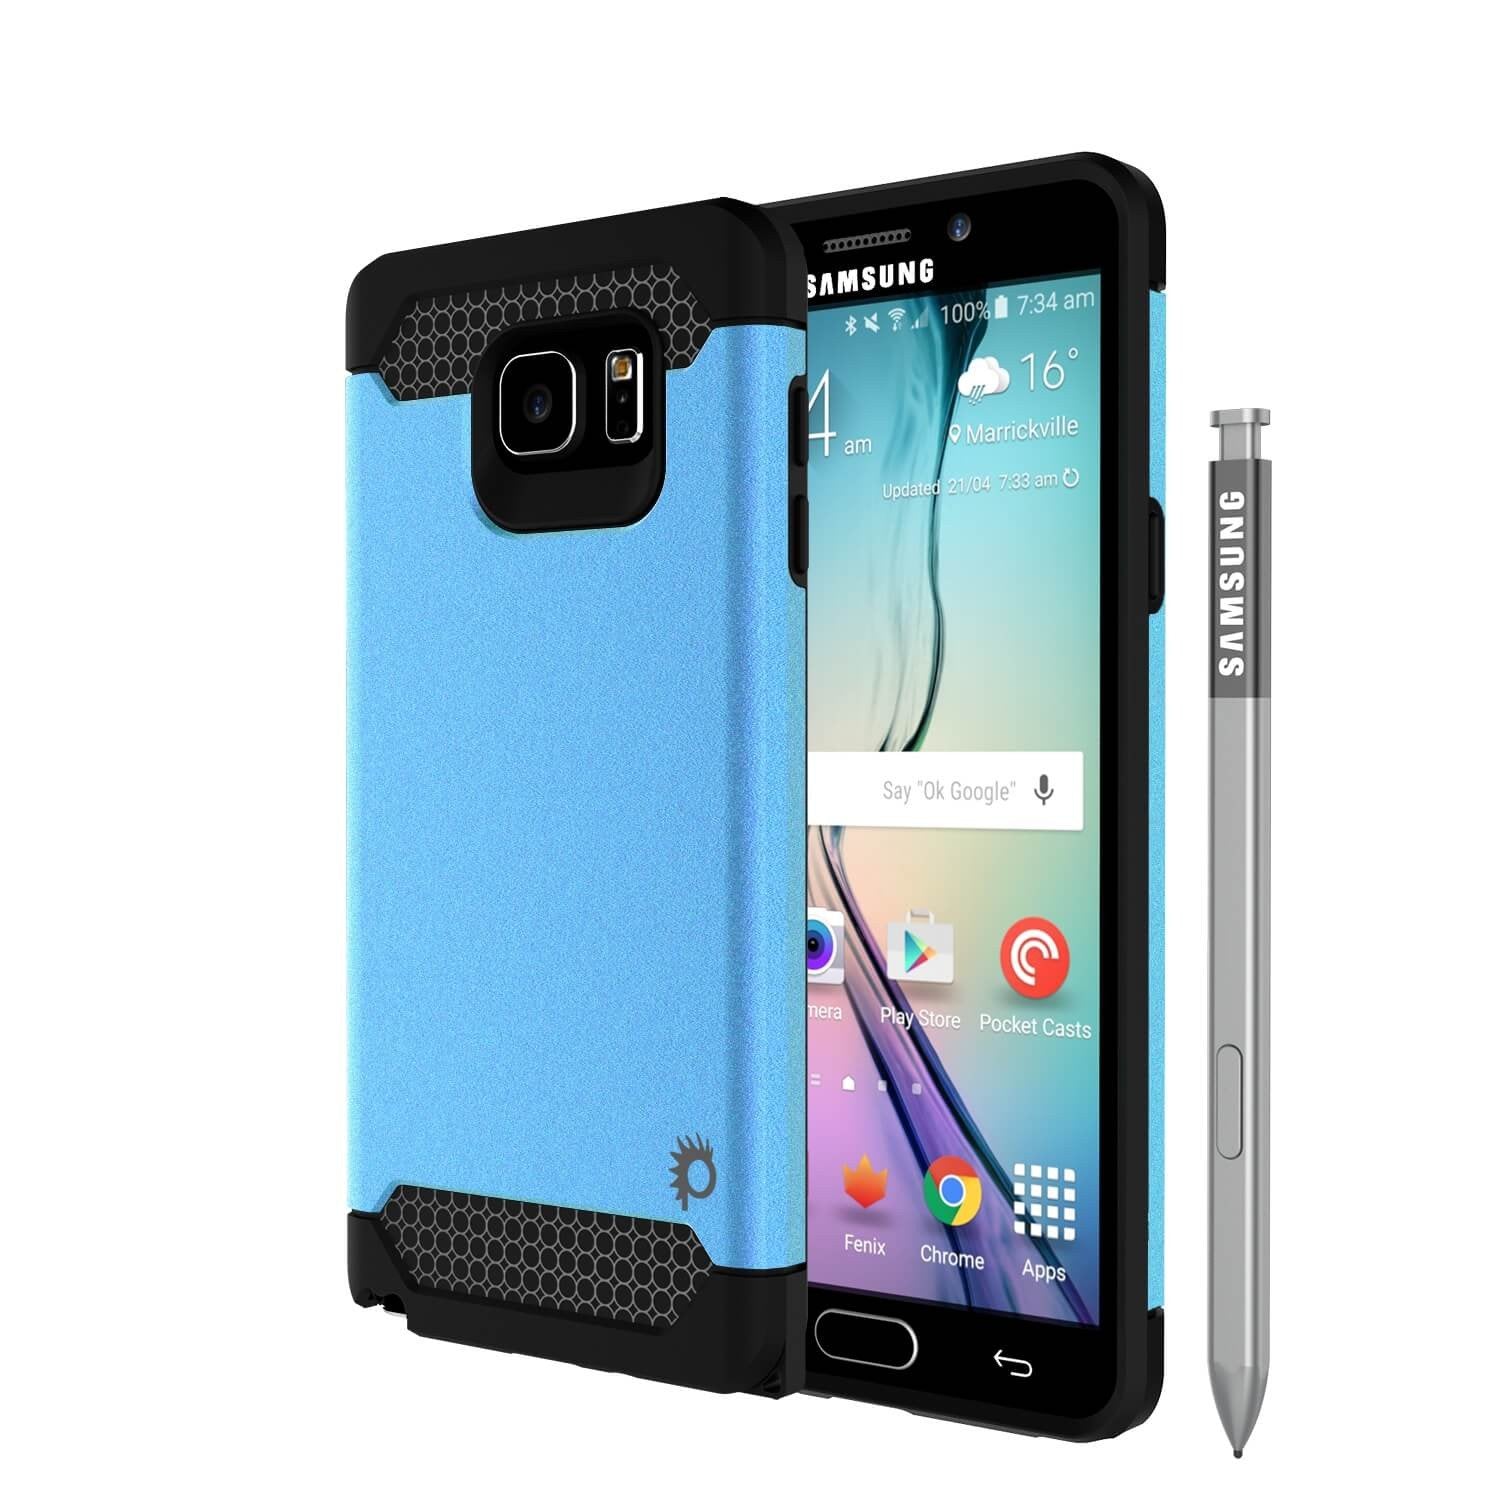 Galaxy Note 5 Case PunkCase Galactic Teal Series Slim Armor Soft Cover Case w/ Tempered Glass - PunkCase NZ